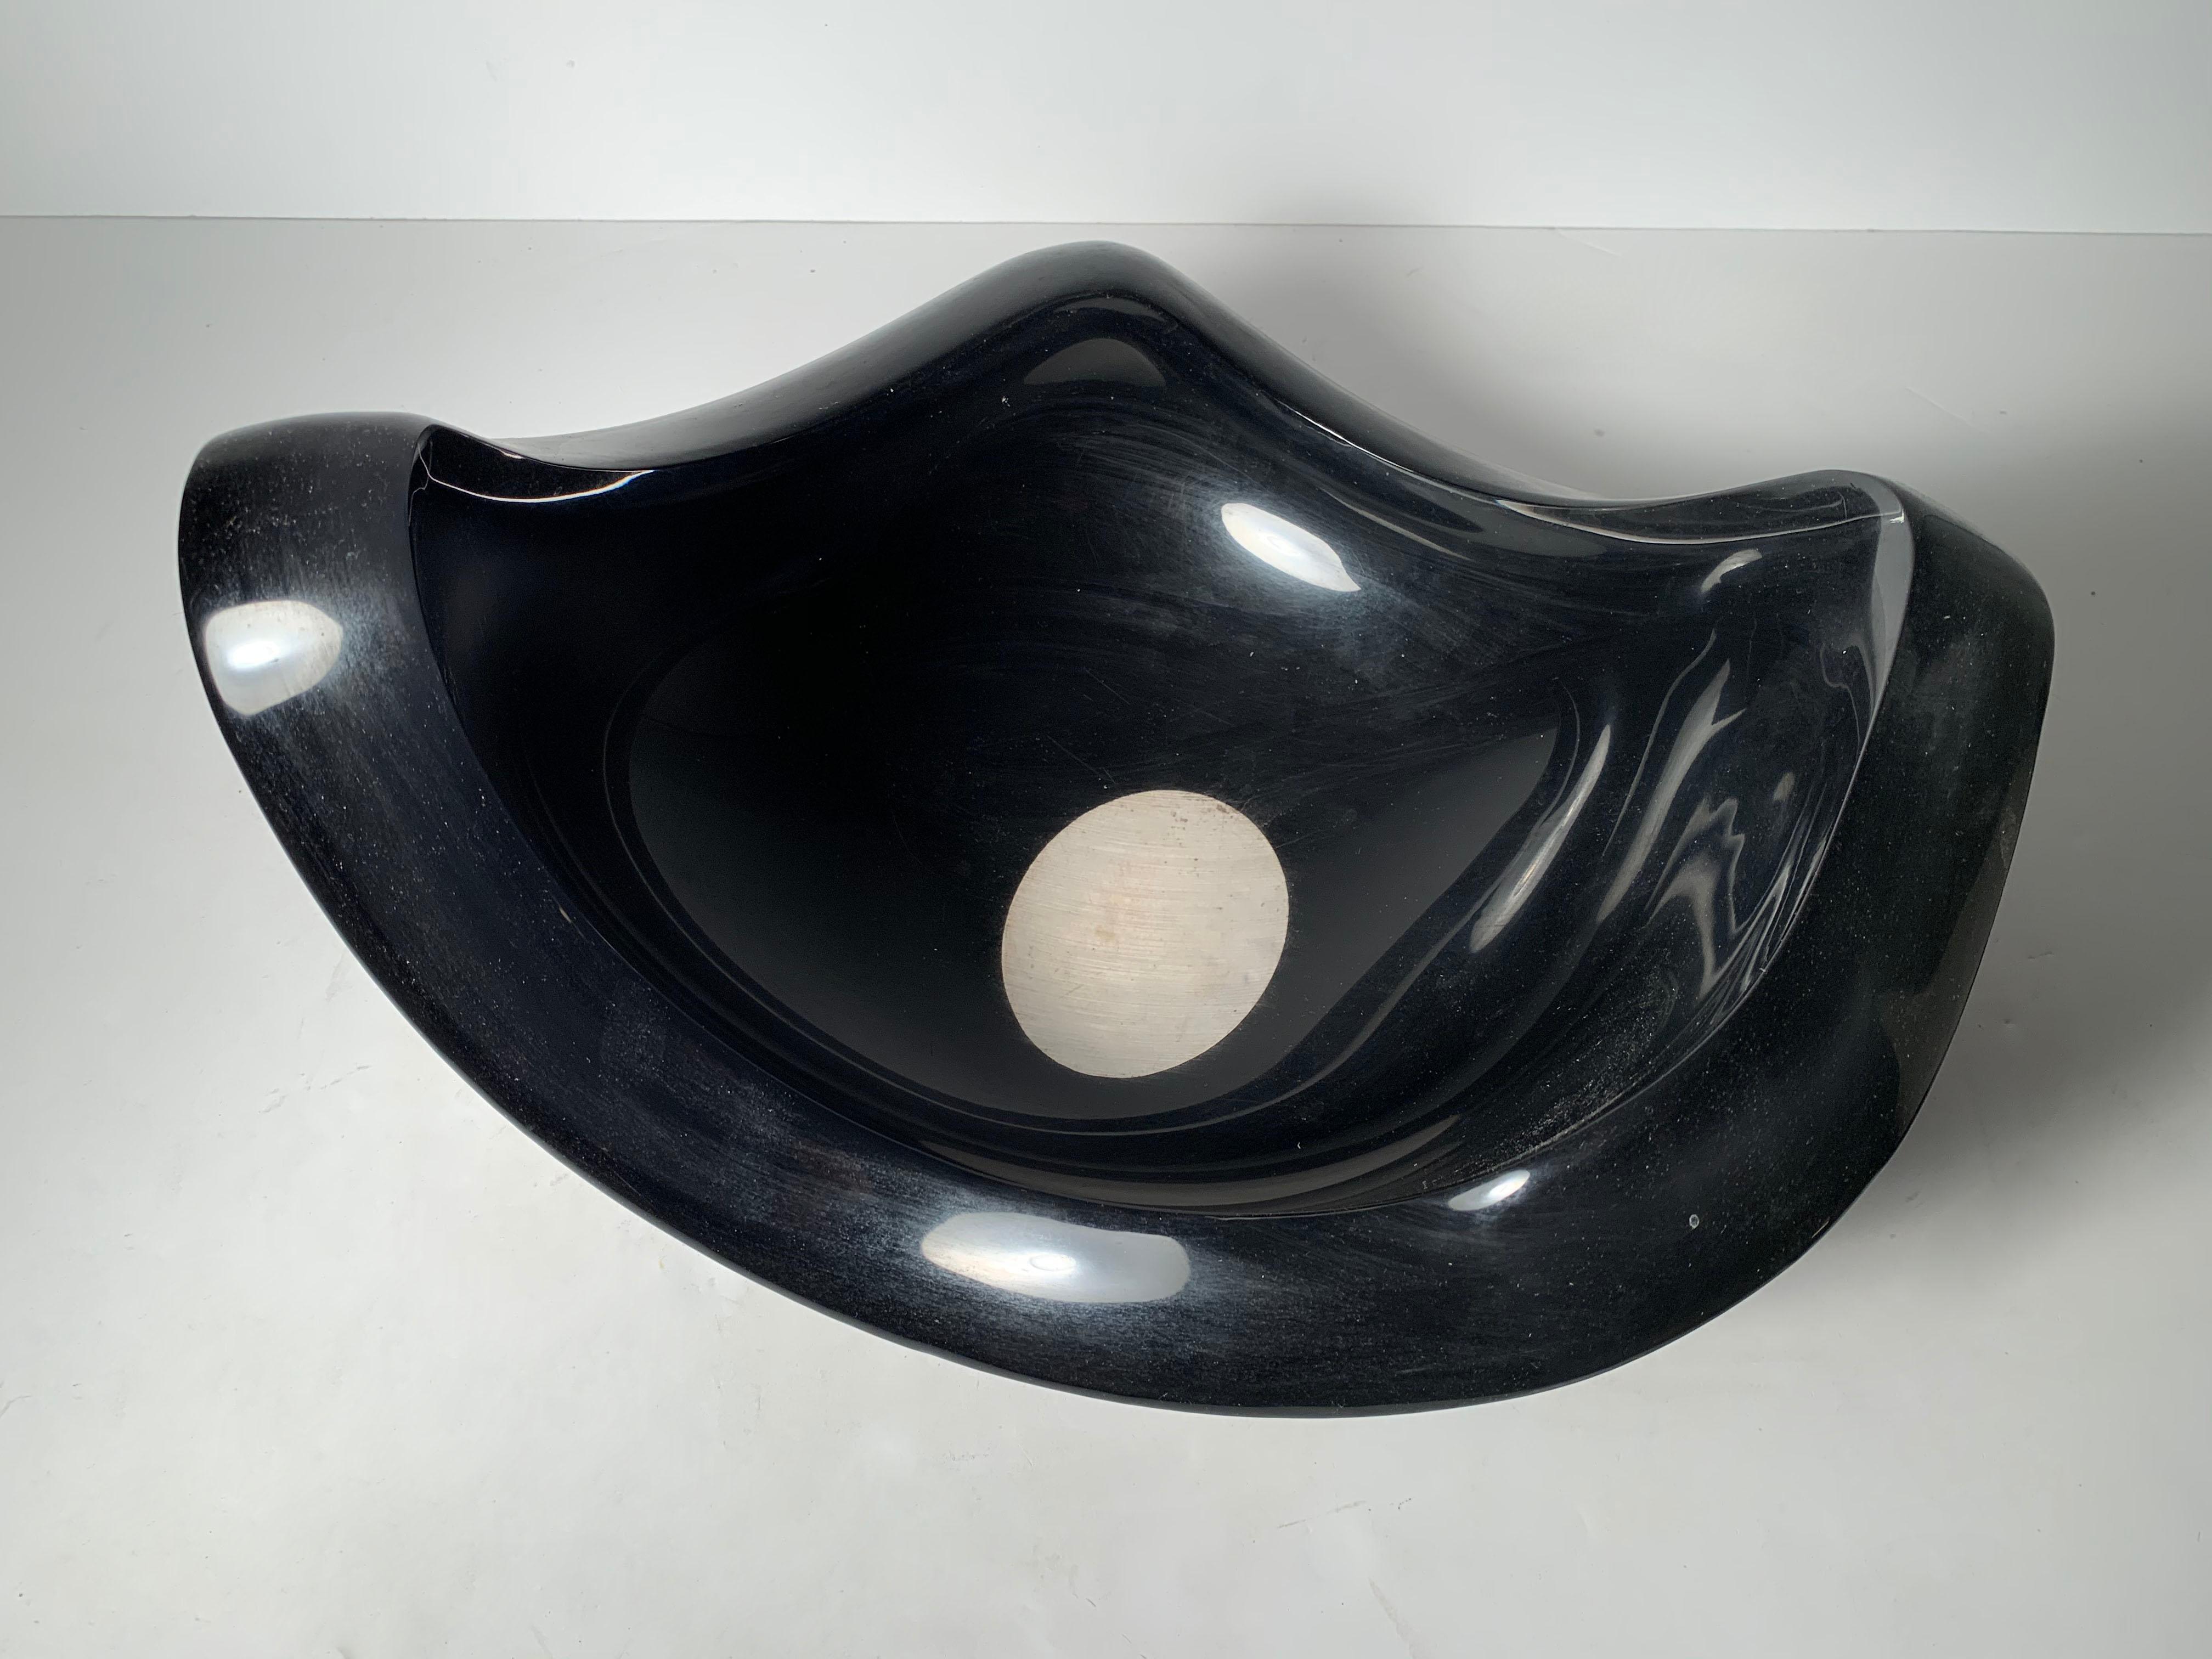 20th Century Substantial Free Form Organic Lucite Bowl Attributed to Astrolite Herbert Ritts